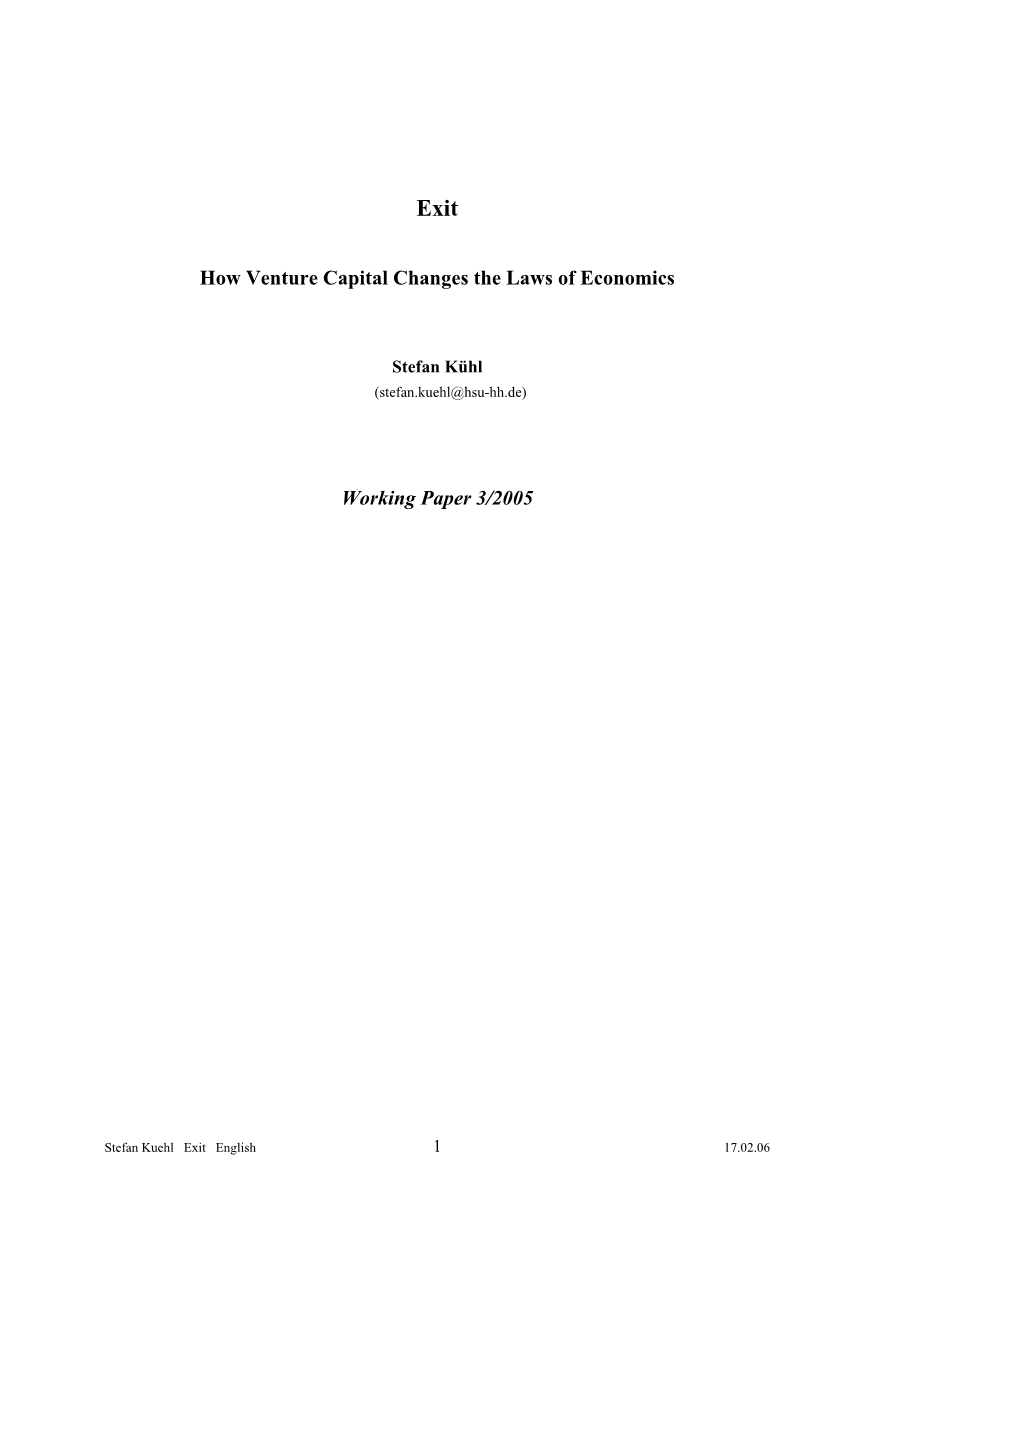 How Venture Capital Changes the Laws of Economics Working Paper